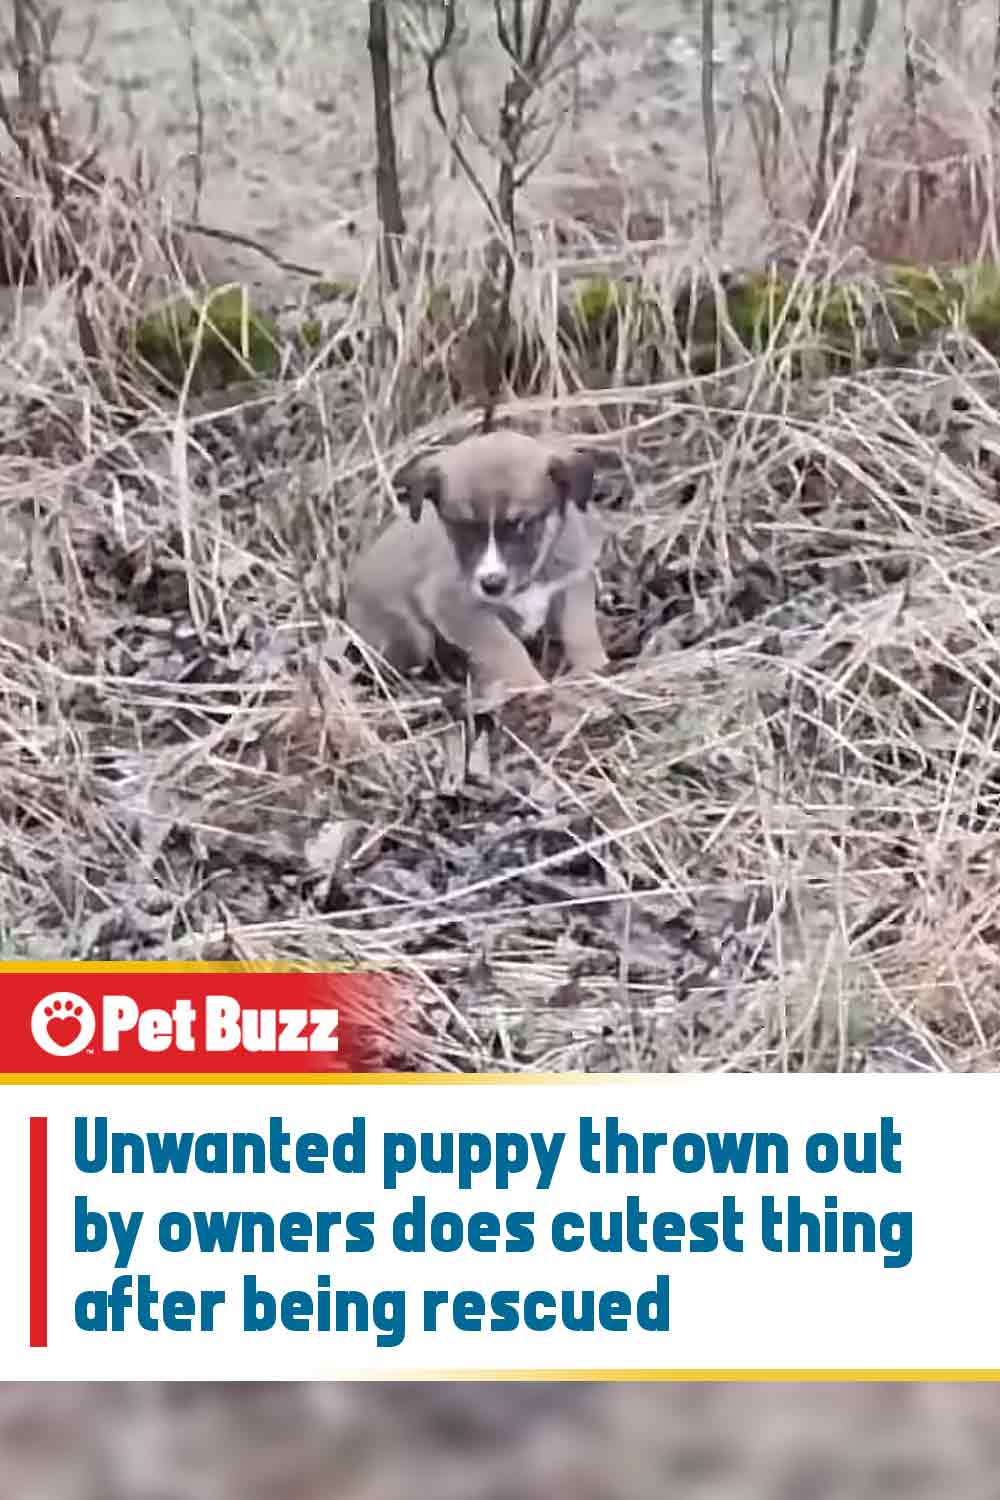 Unwanted puppy thrown out by owners does cutest thing after being rescued